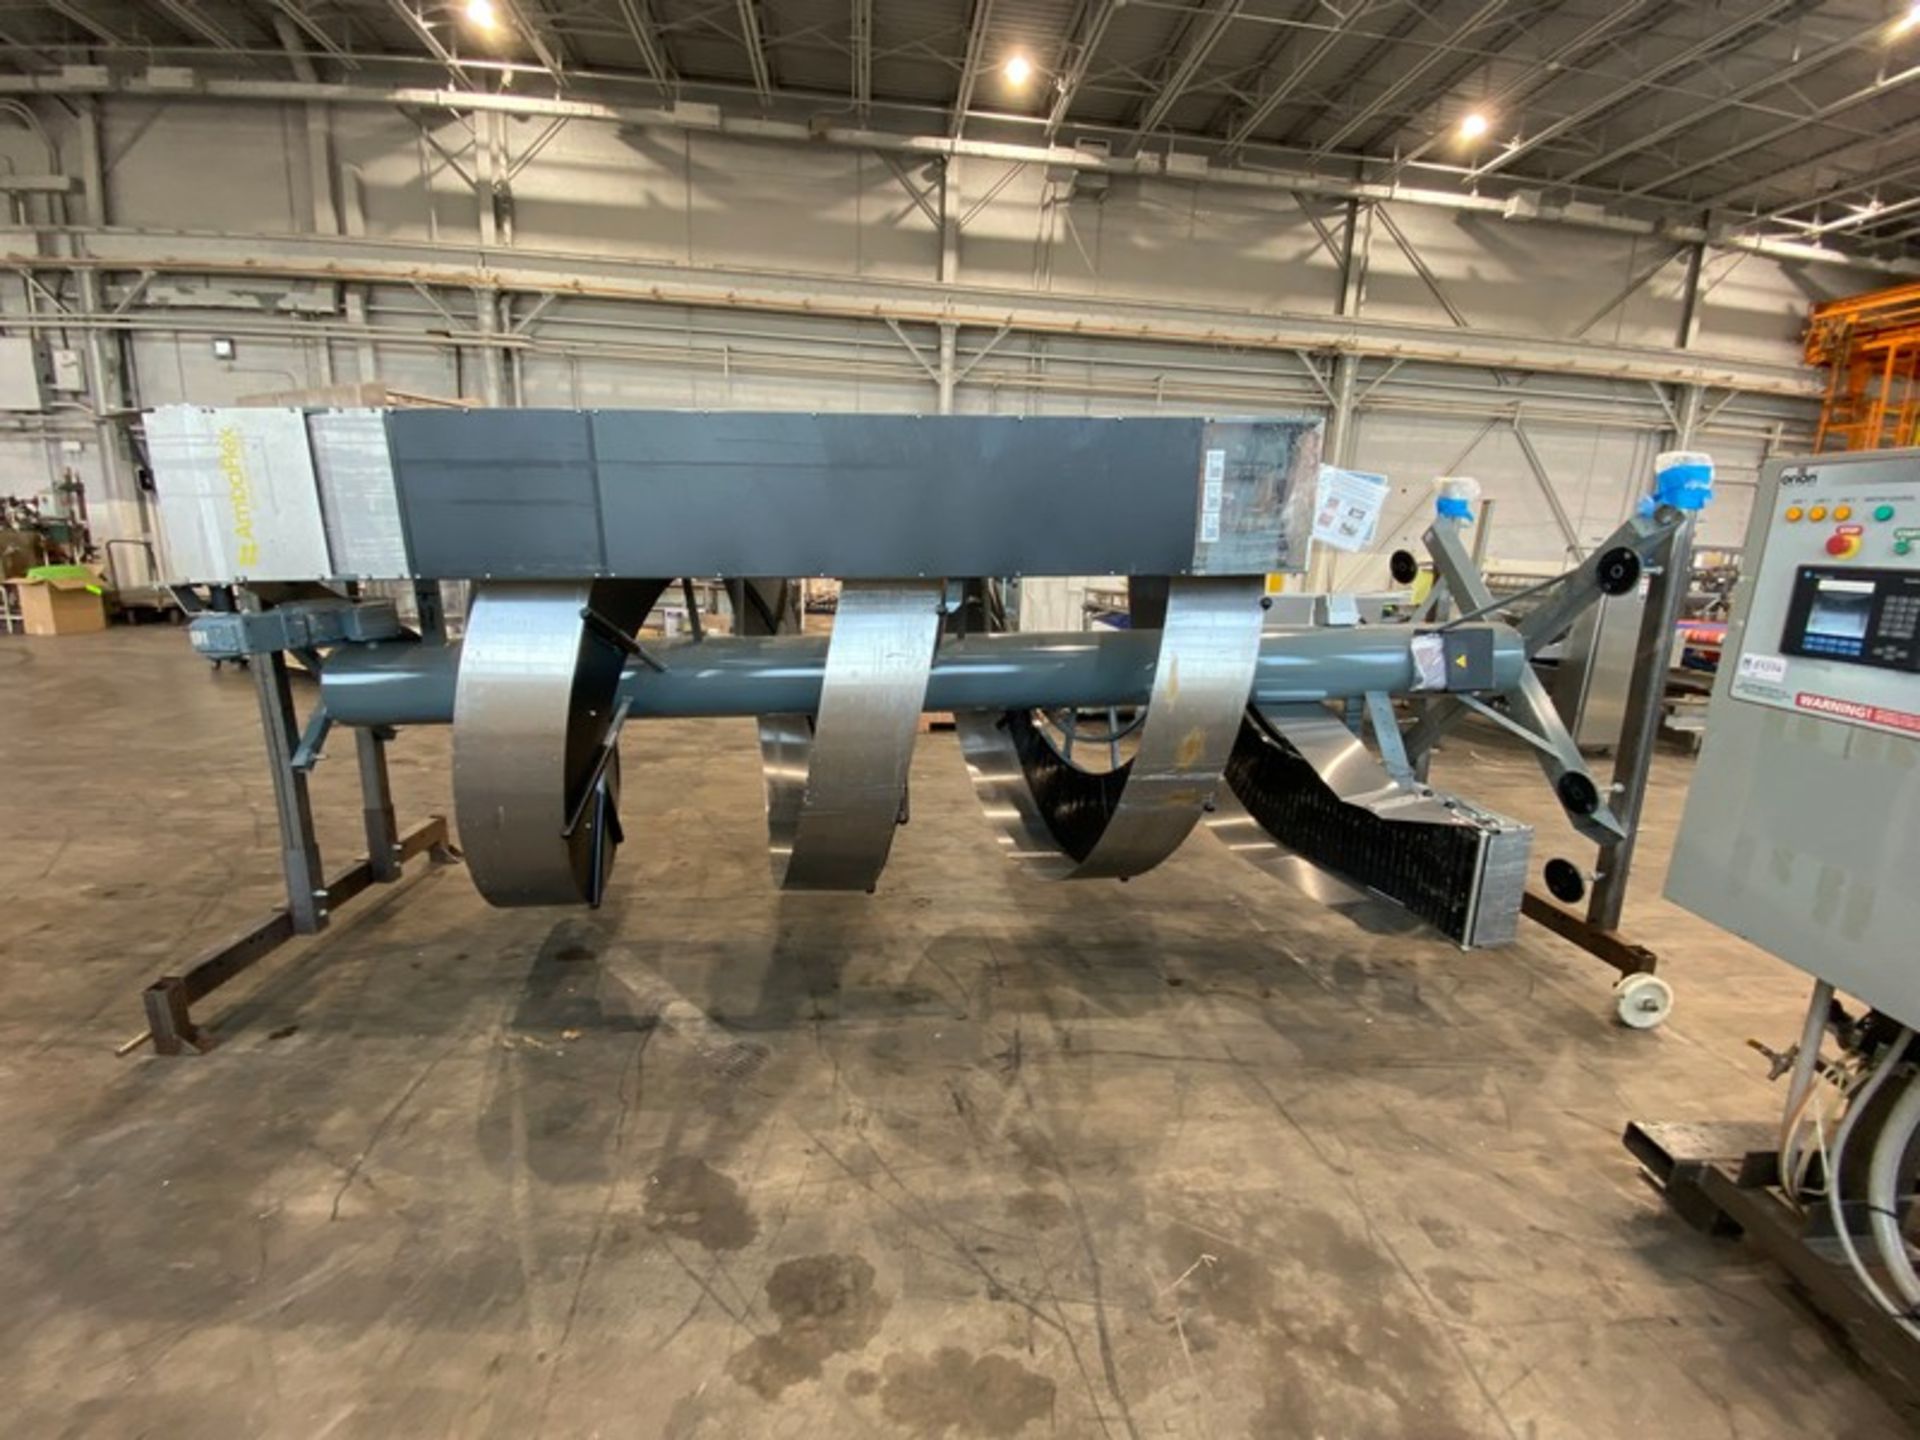 AMBIFLEX SPIRAL INCLINE CONVEYOR (YOG107)(INV#84353)(Located @ the MDG Auction Showroom 2.0 in - Image 3 of 5